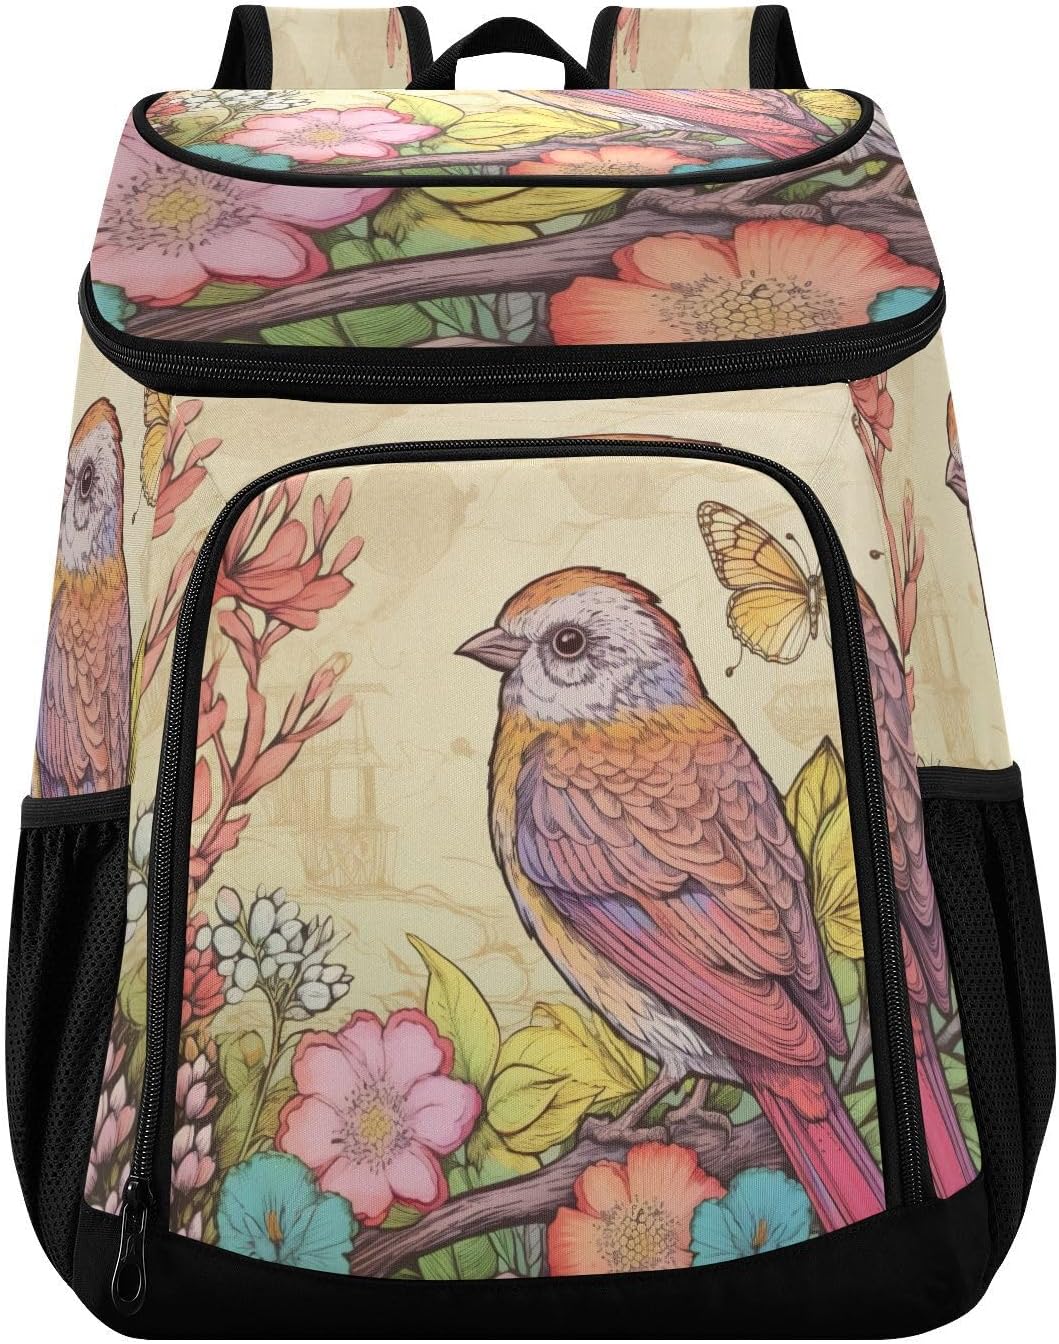 Cooler Backpack Bird and Flowers Waterproof Insulated Cooler Backpack ...